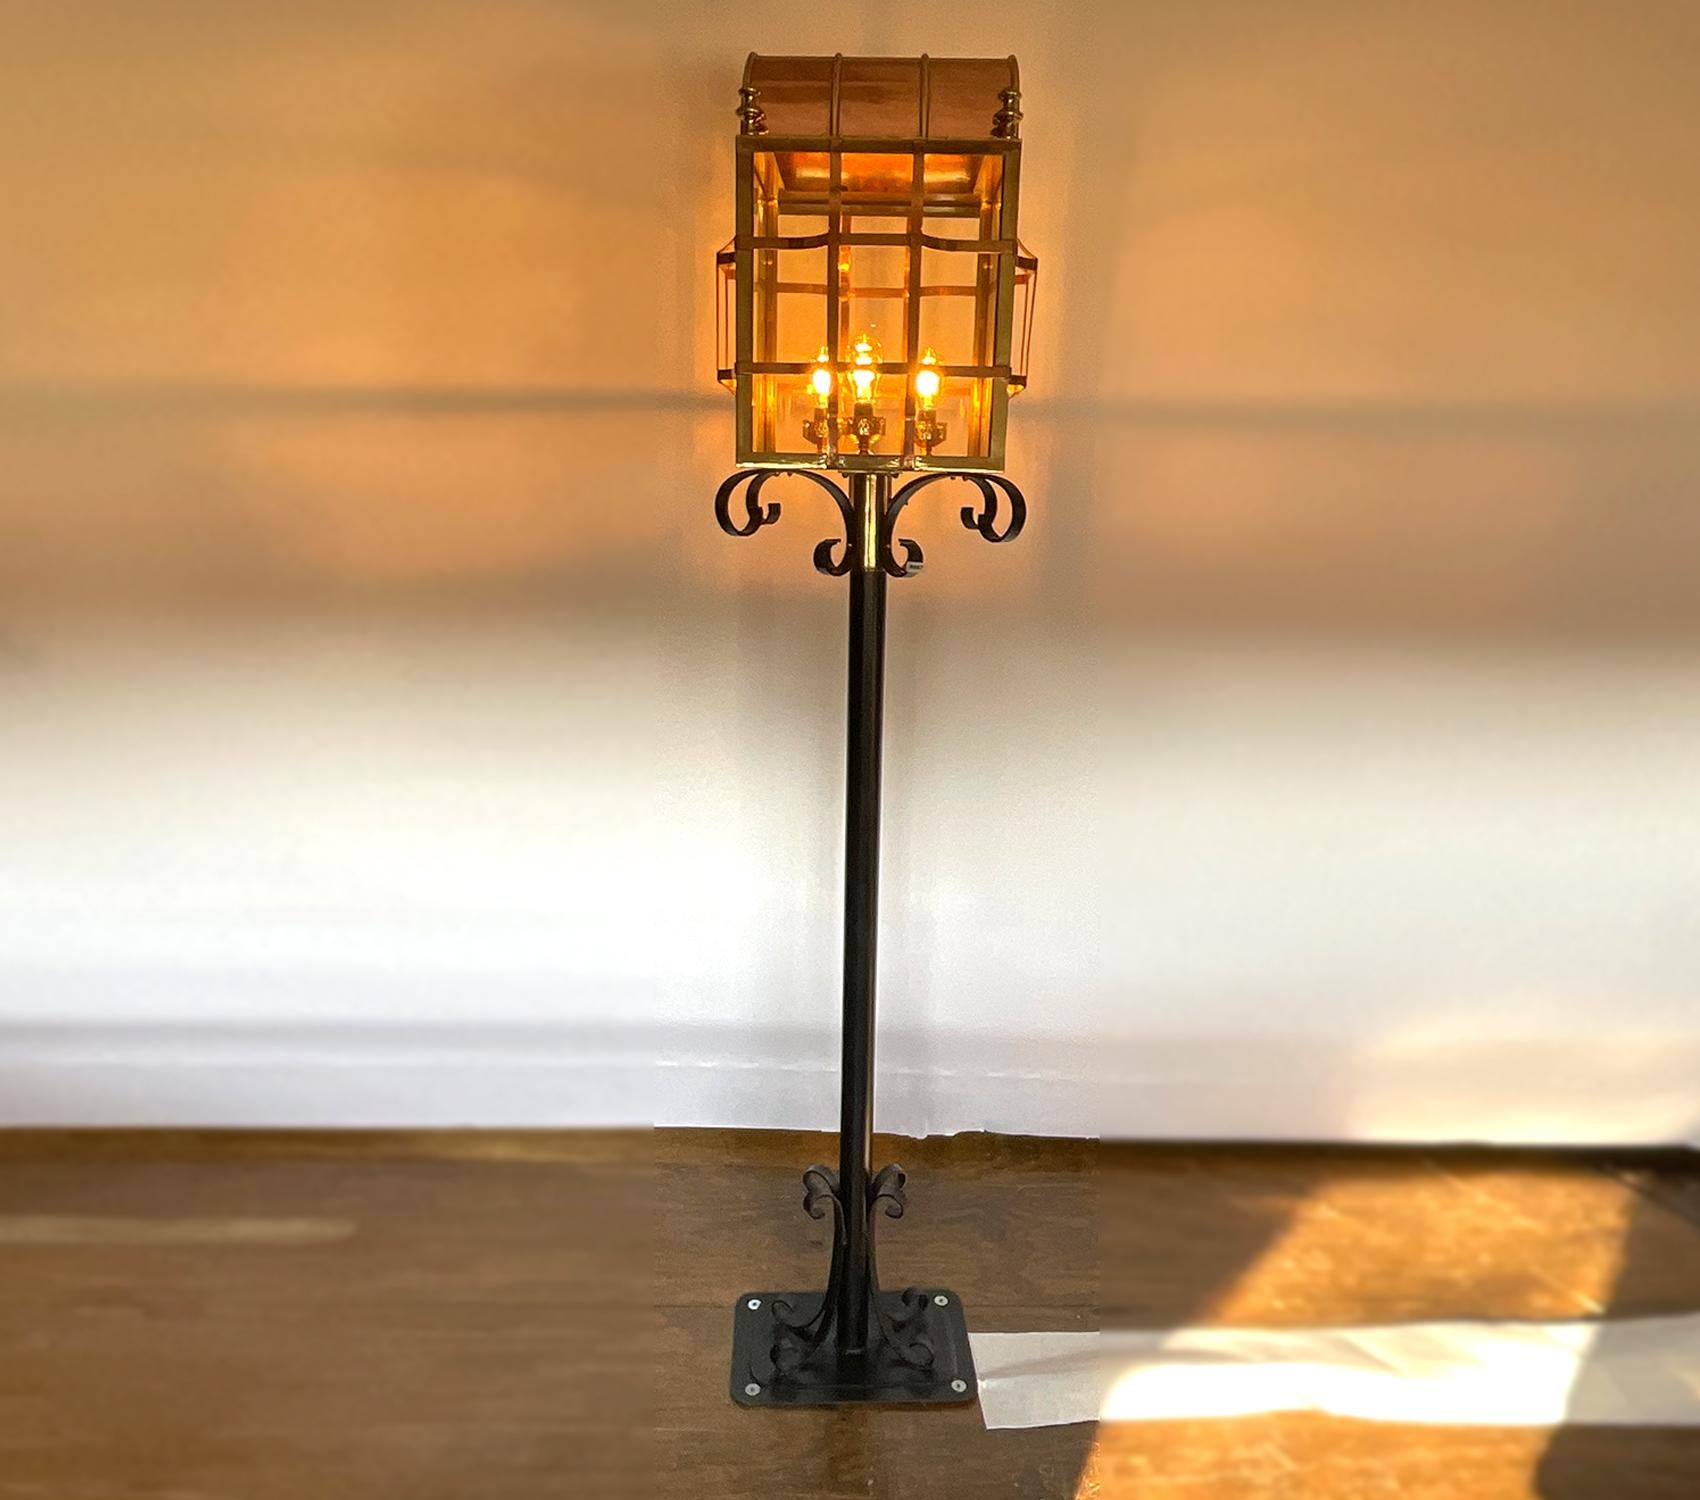 Massive outdoor lantern from the famous Pier 4 restaurant in Boston. Purchased at the liquidation auction. Wonderfully restored. Copper and brass housing. Glass panels. Meticulously polished and lacquered. Mounted on iron base. Two